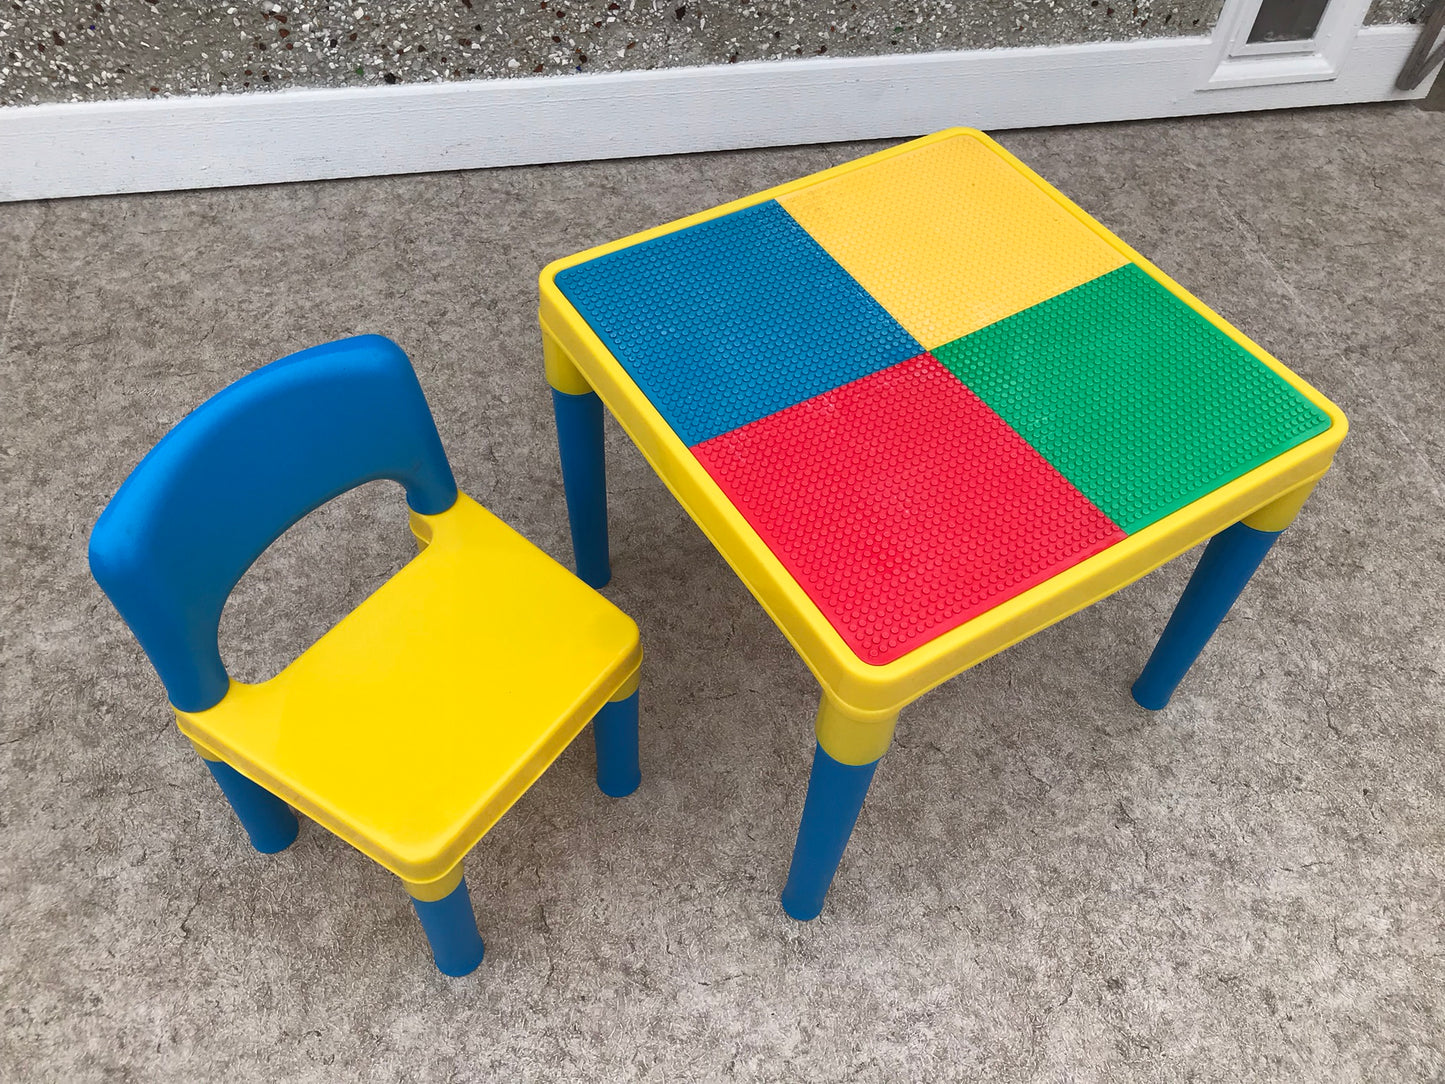 Lego Table Child Size 2-6 Fits Regular Small Lego and Lego Duplo